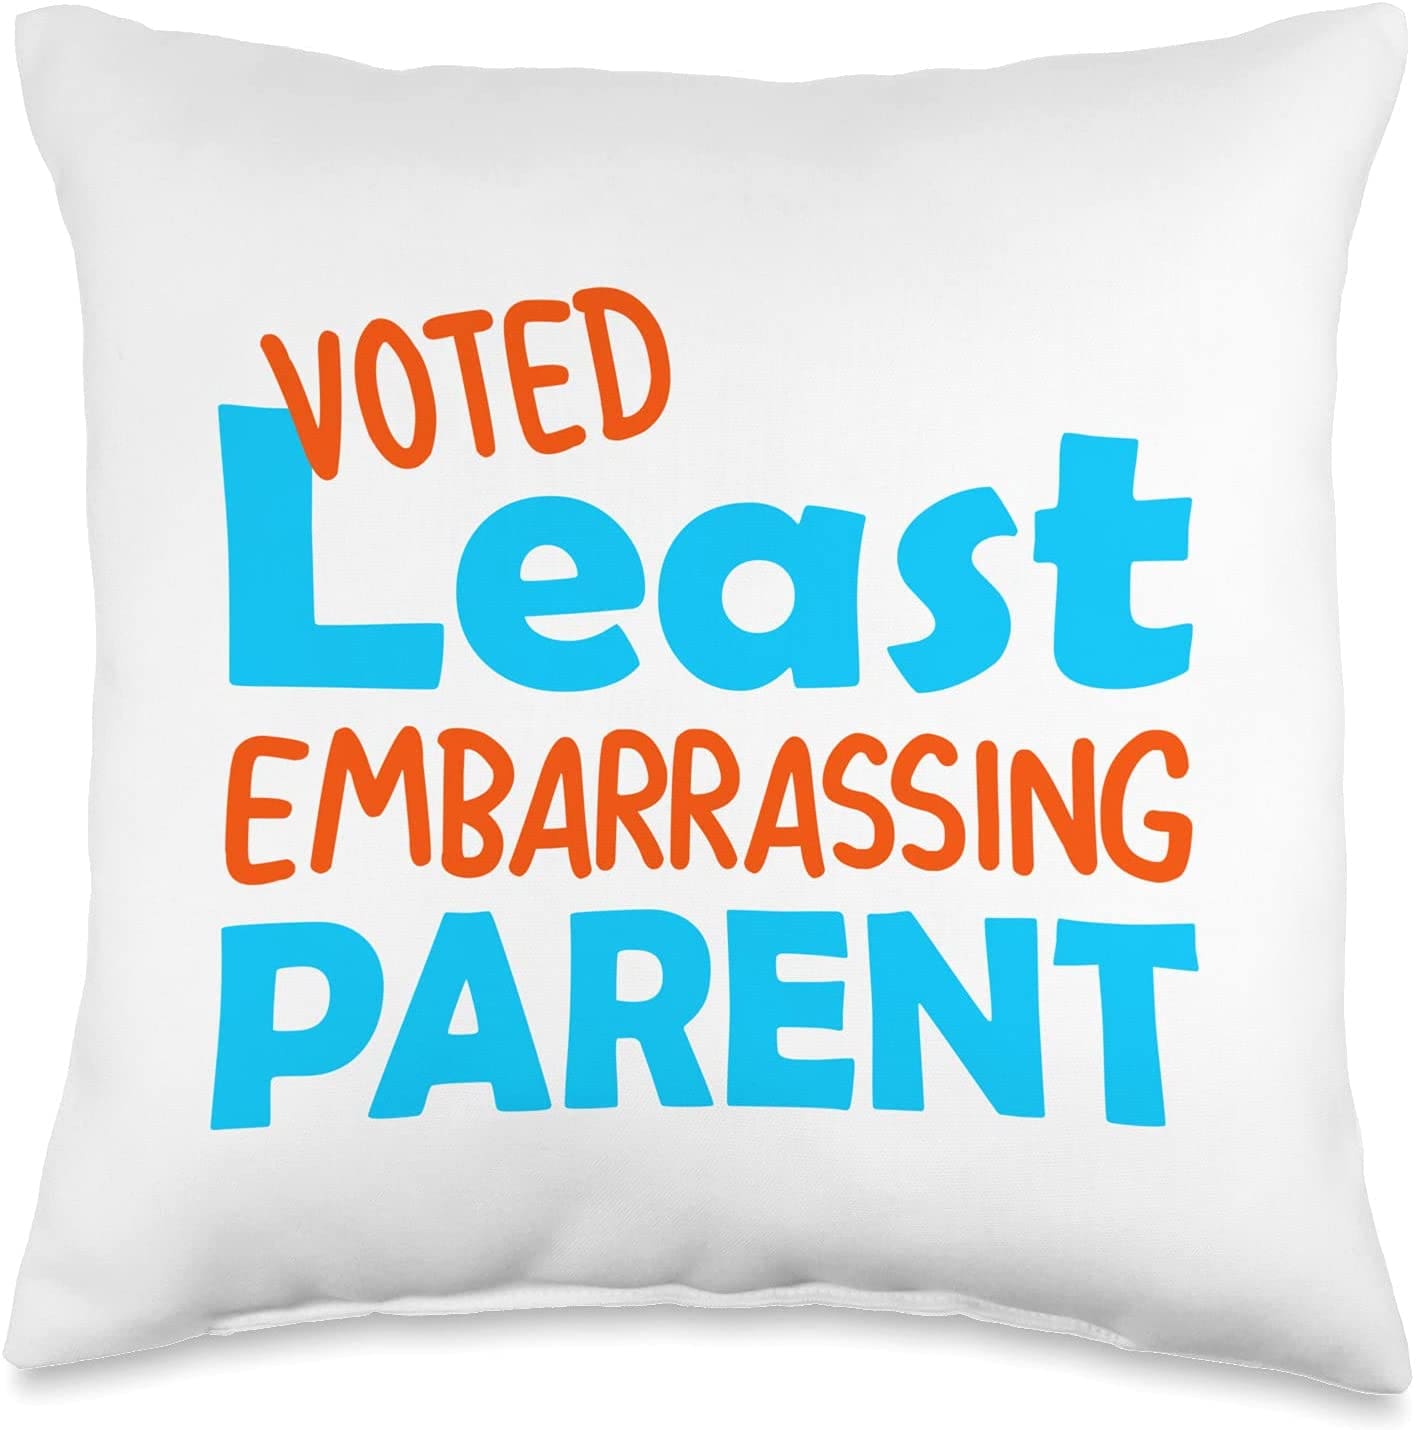 Voted least embarrassing parent throw pillow.